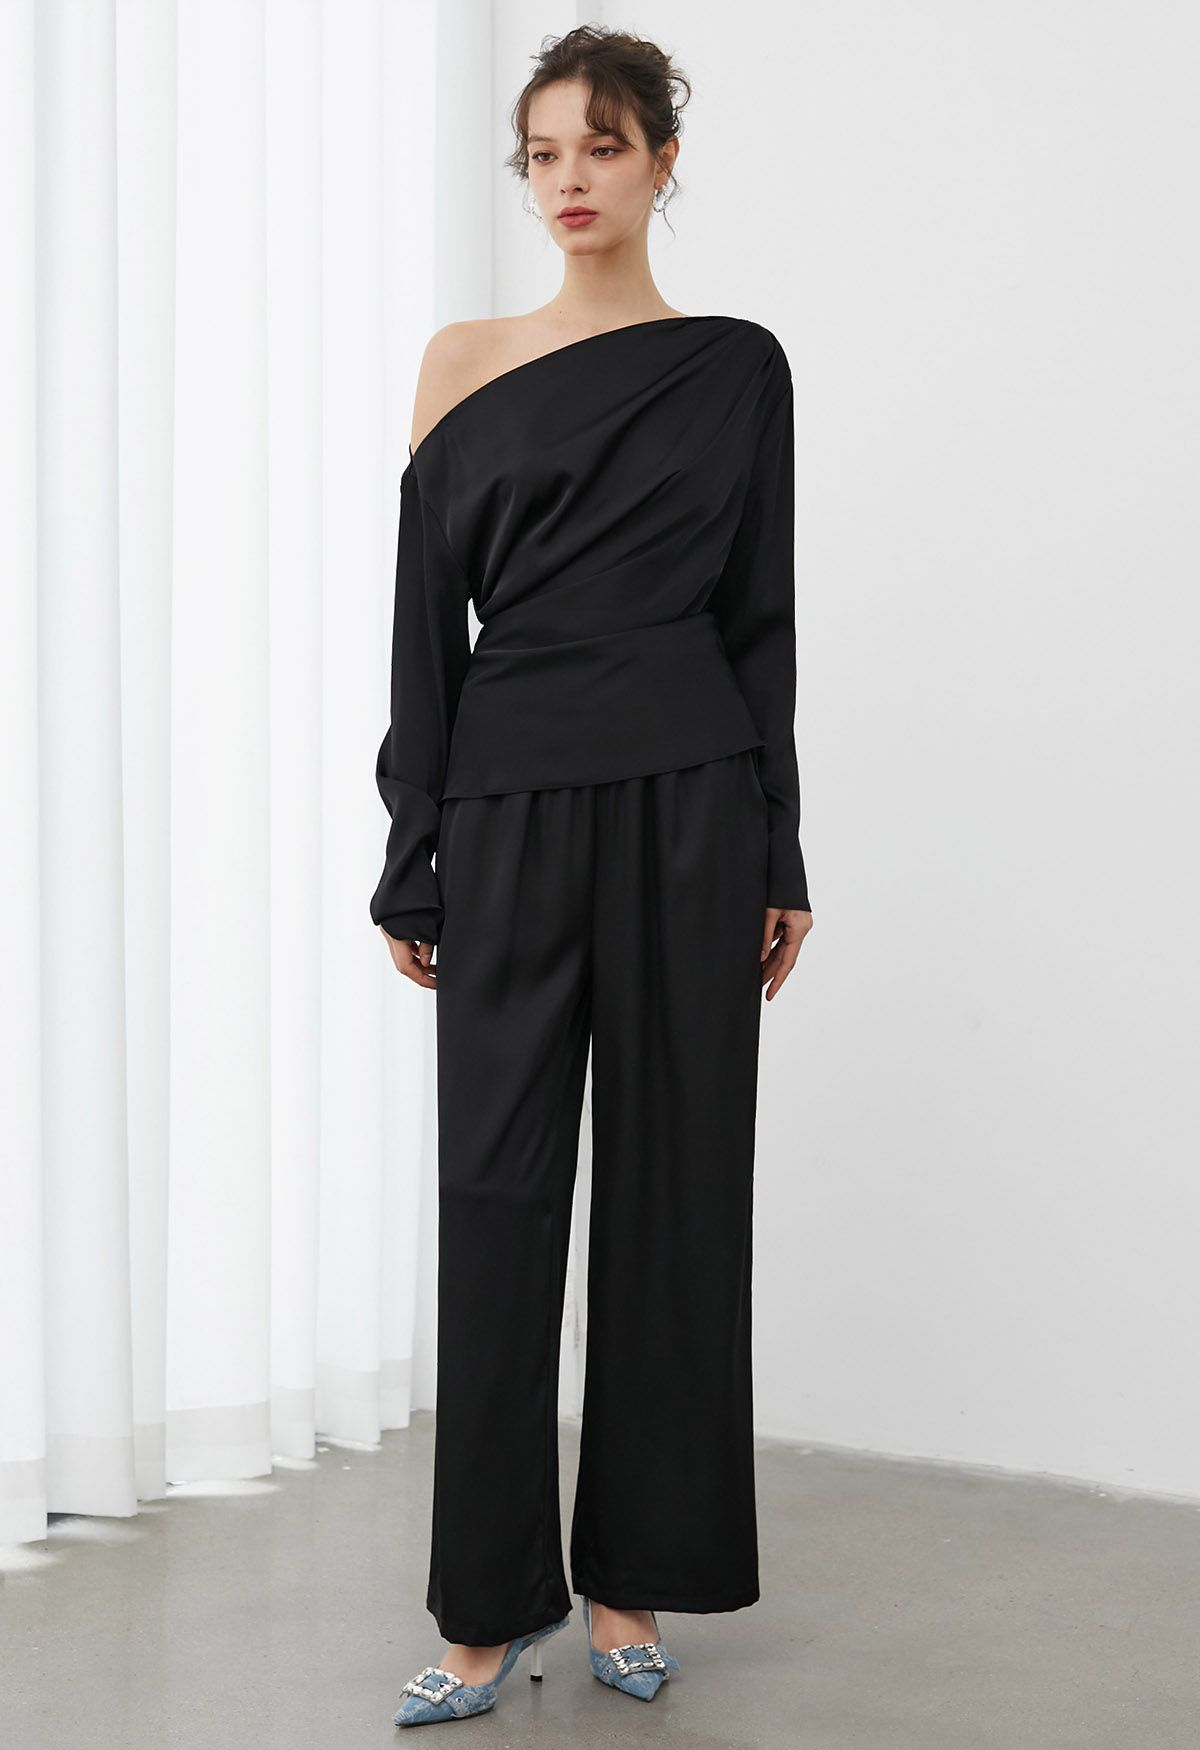 Asymmetric Ruched Satin Long Sleeve Top in Black